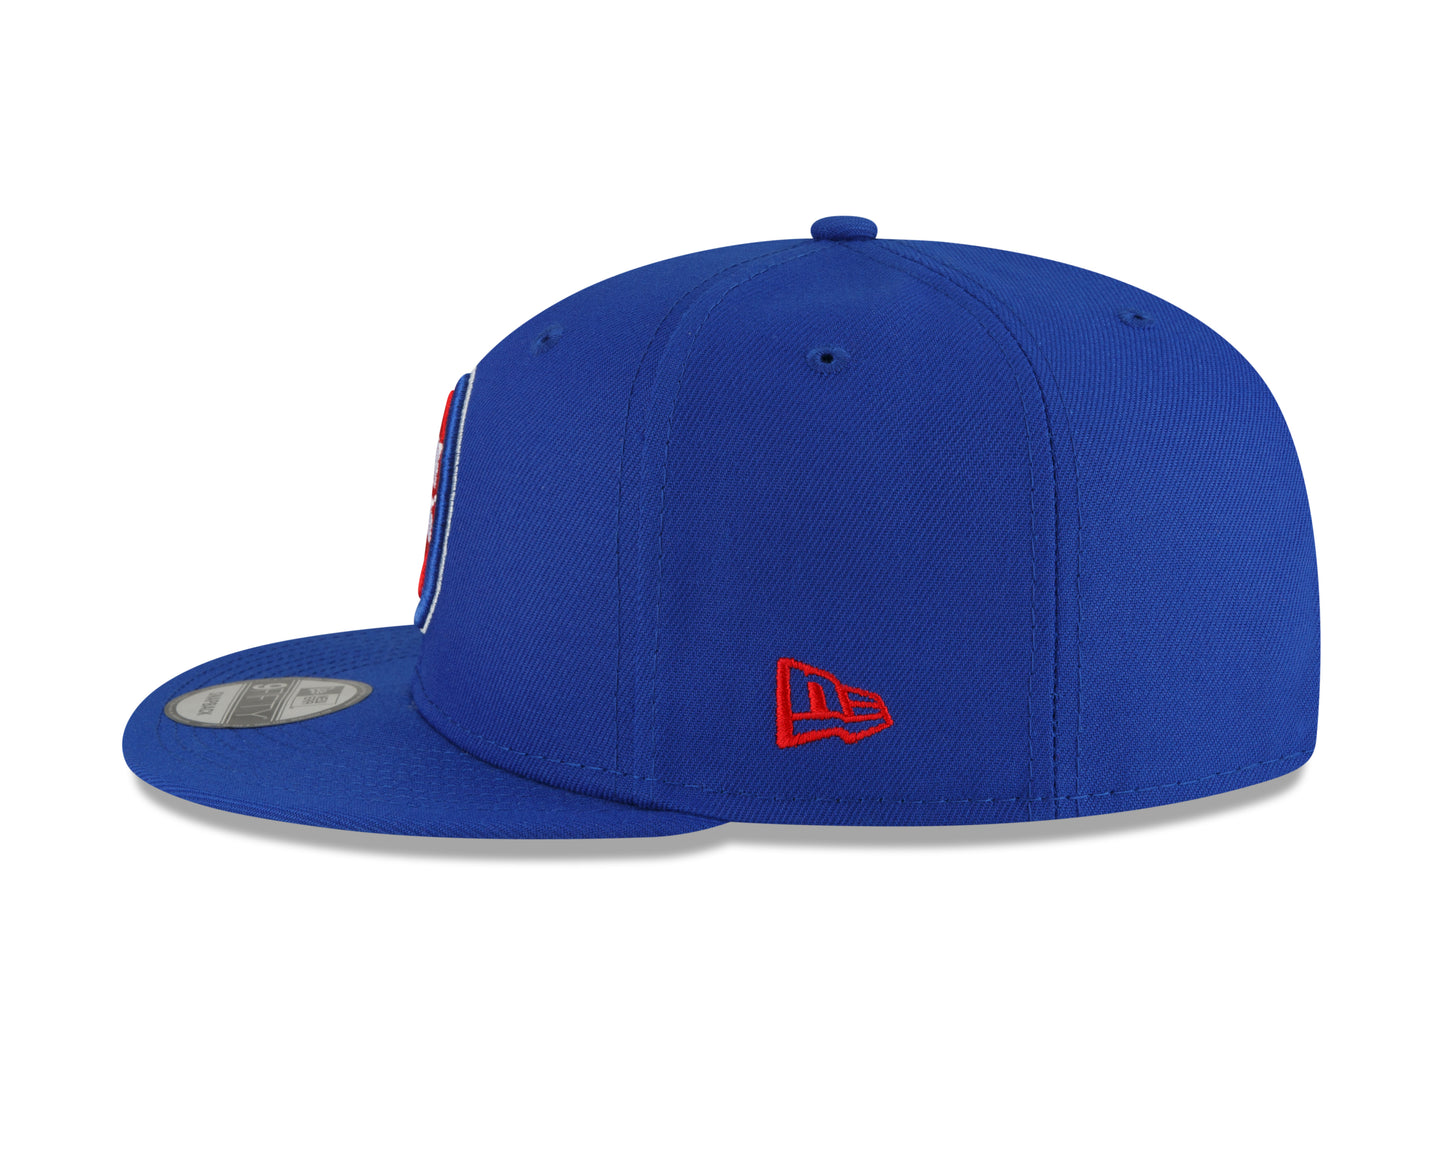 Detroit Pistons Authentic Back Half Series 9FIFTY Snap Back Hat - Blue